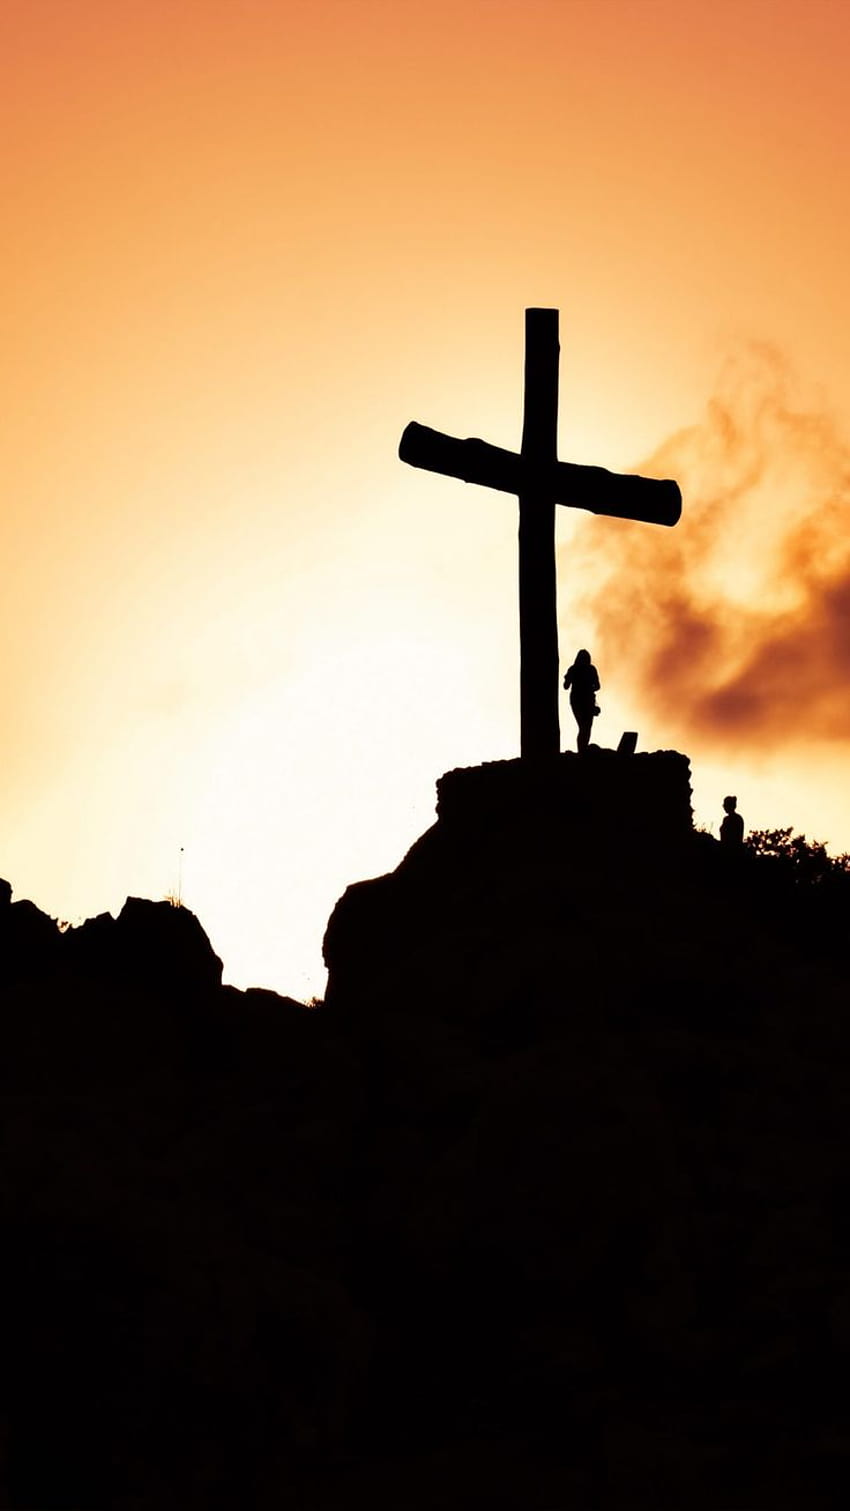 70+ 3 Crosses On A Hill Stock Videos and Royalty-Free Footage - iStock